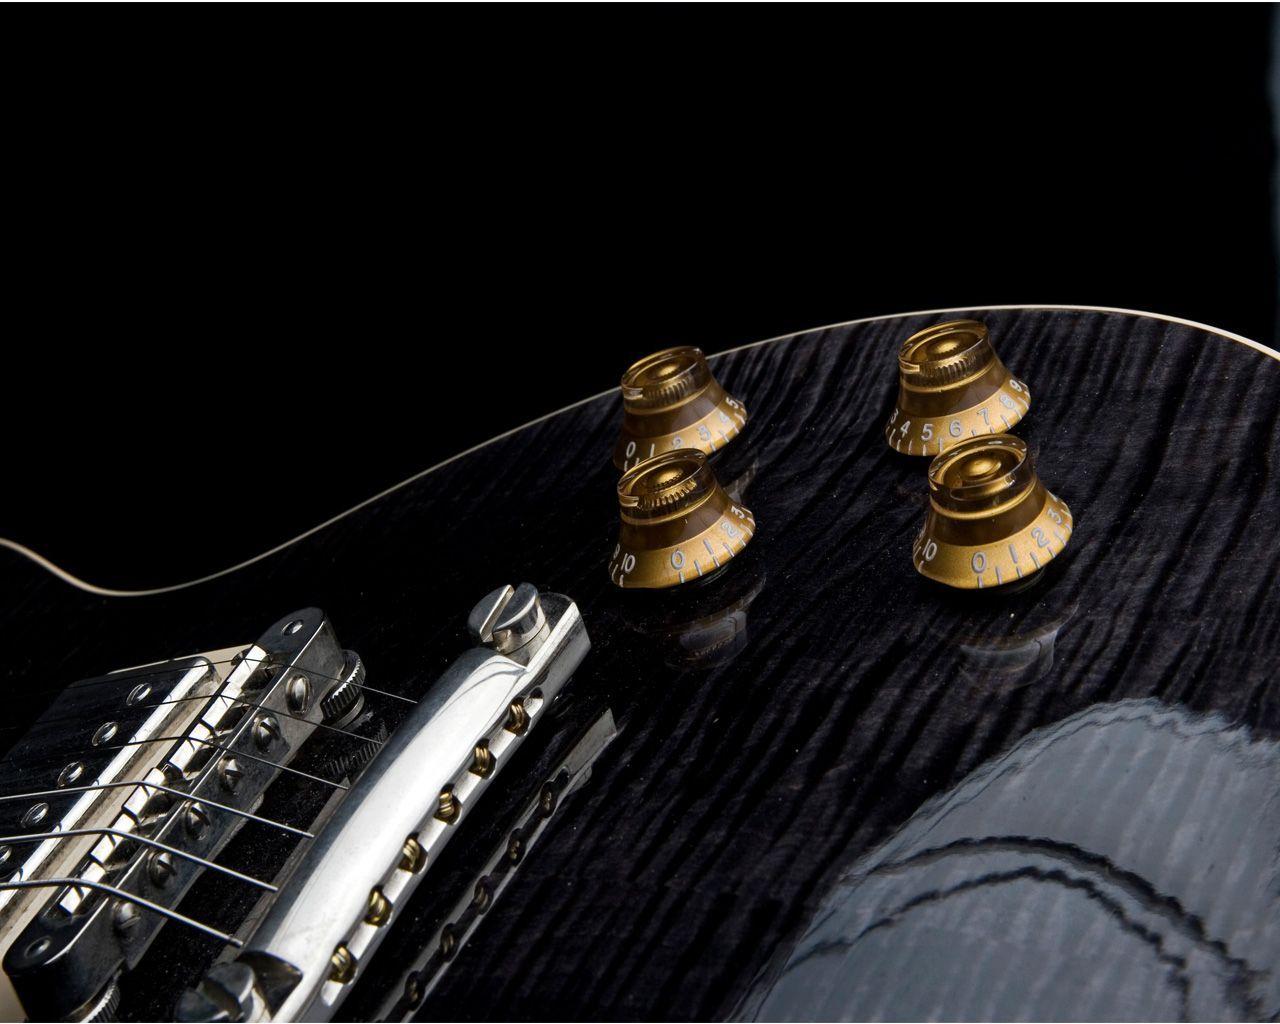 Guitar Wallpaper Electric Guitar with Gold Contols. Music